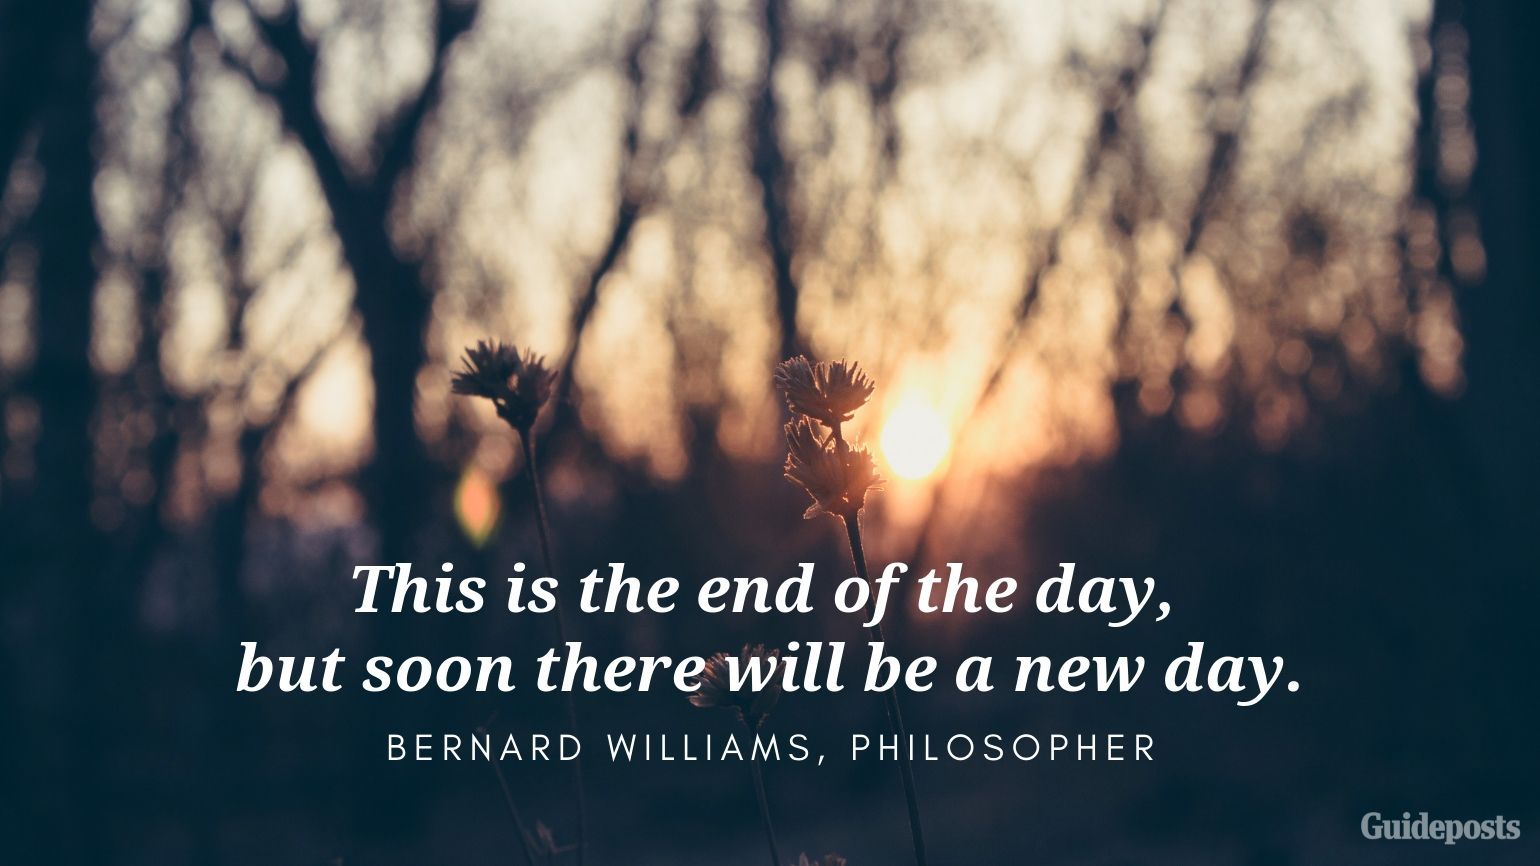 Bernard Williams Positive Quote for Bedtime Better Living Positive Living Positive Thinking